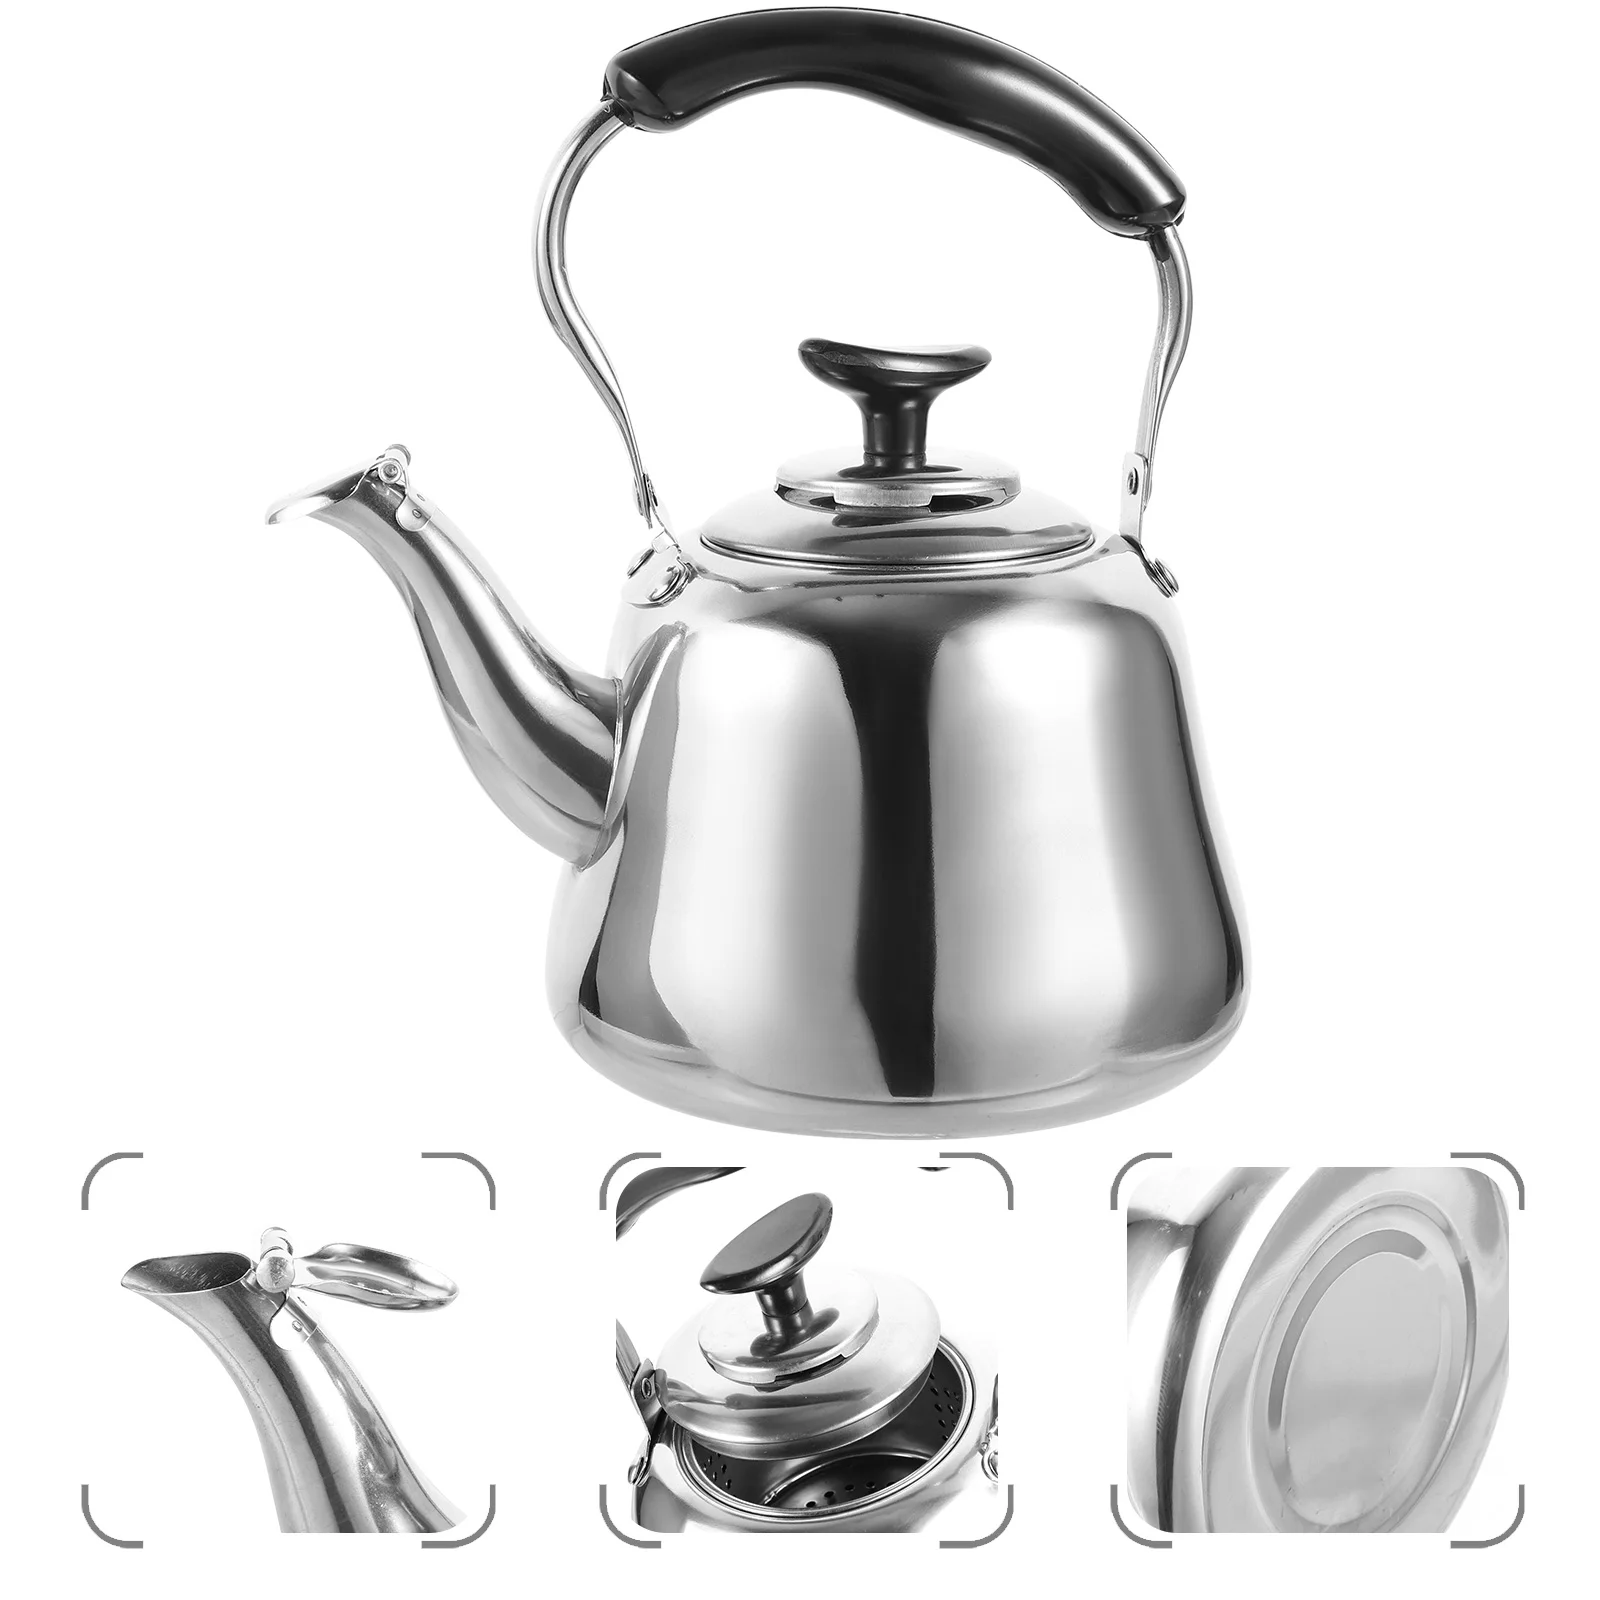 

Kettle Tea Whistling Water Teapot Stainless Steel Stovetop Stove Pot Boiling Coffee Gas Kettles Teakettle Hot Boil Camping